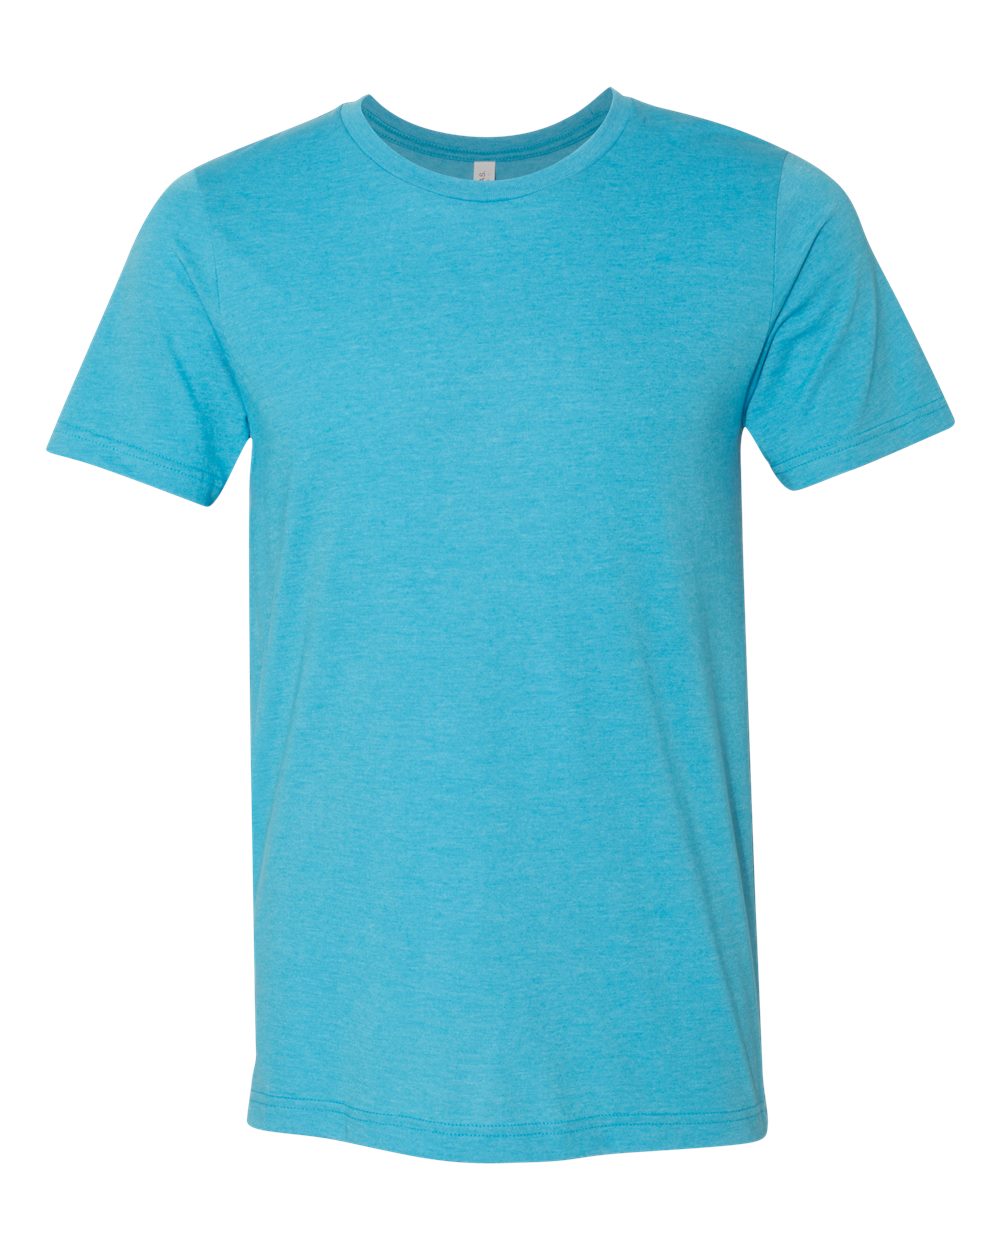 Game Changer Therapy Services Short Sleeve Tee - SUMMER COLORS!